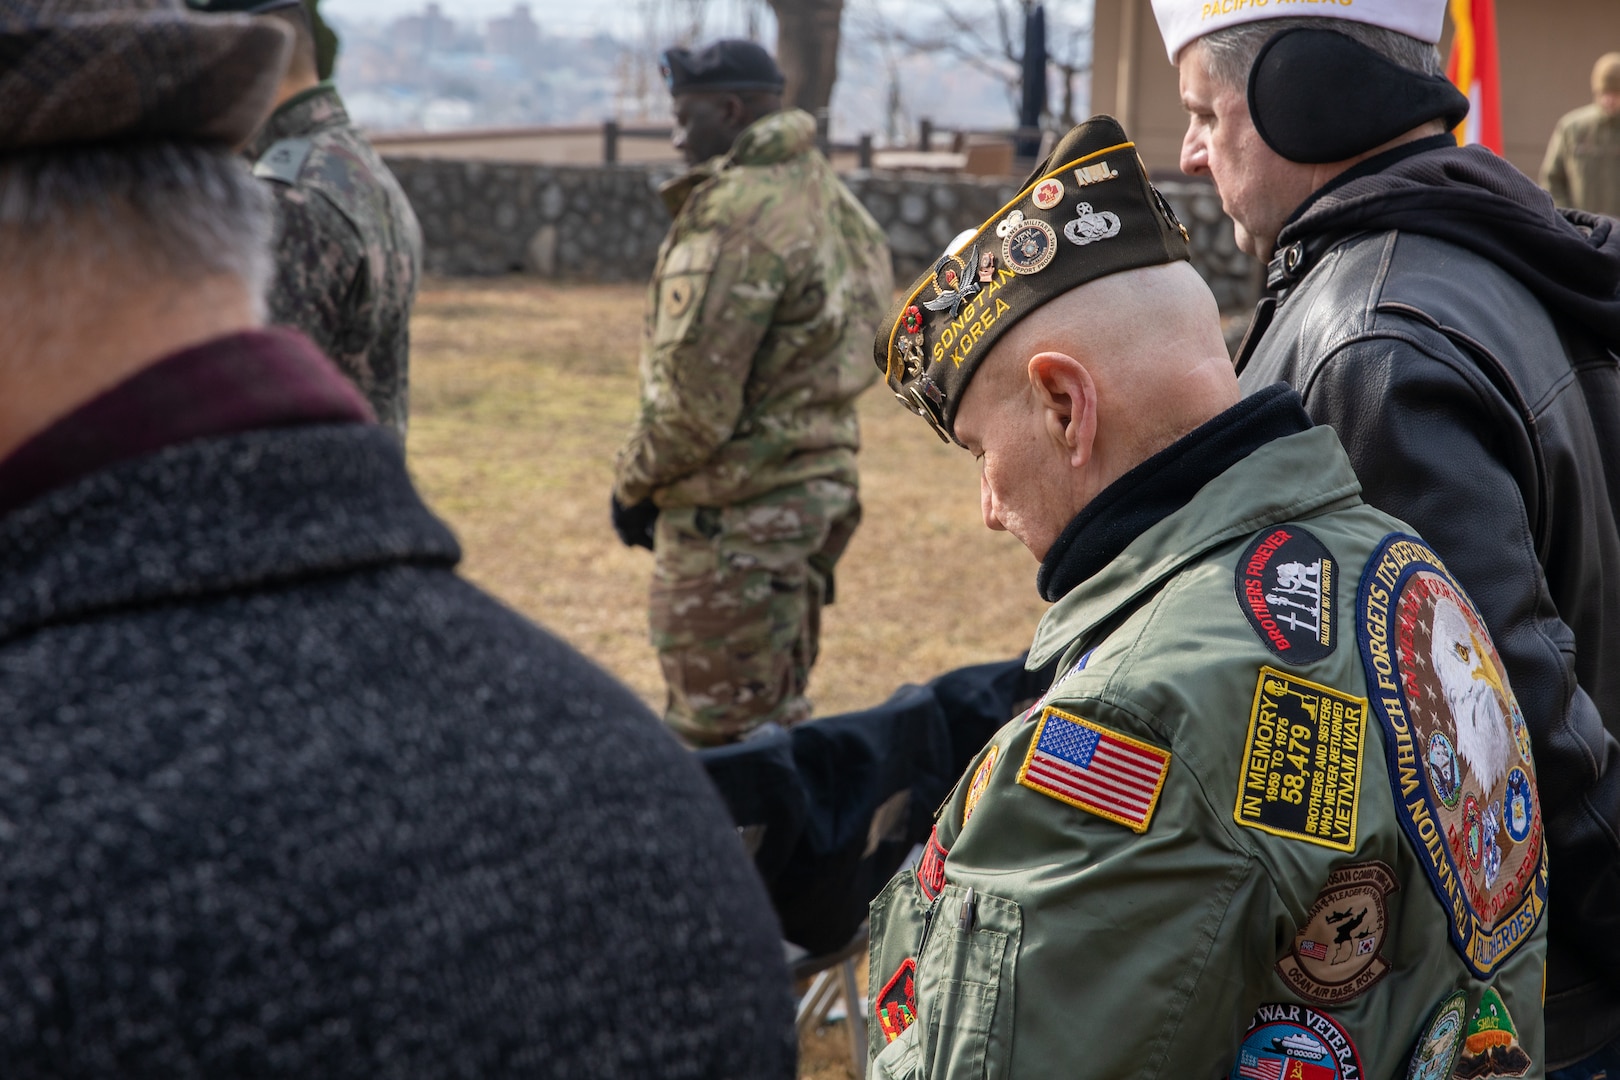 A member of the Veterans of Foreign Wars Cohort bows his head during the 72nd annual Battle of Hill 180 Ceremony at Osan Air Base, South Korea, Feb. 2, 2023.